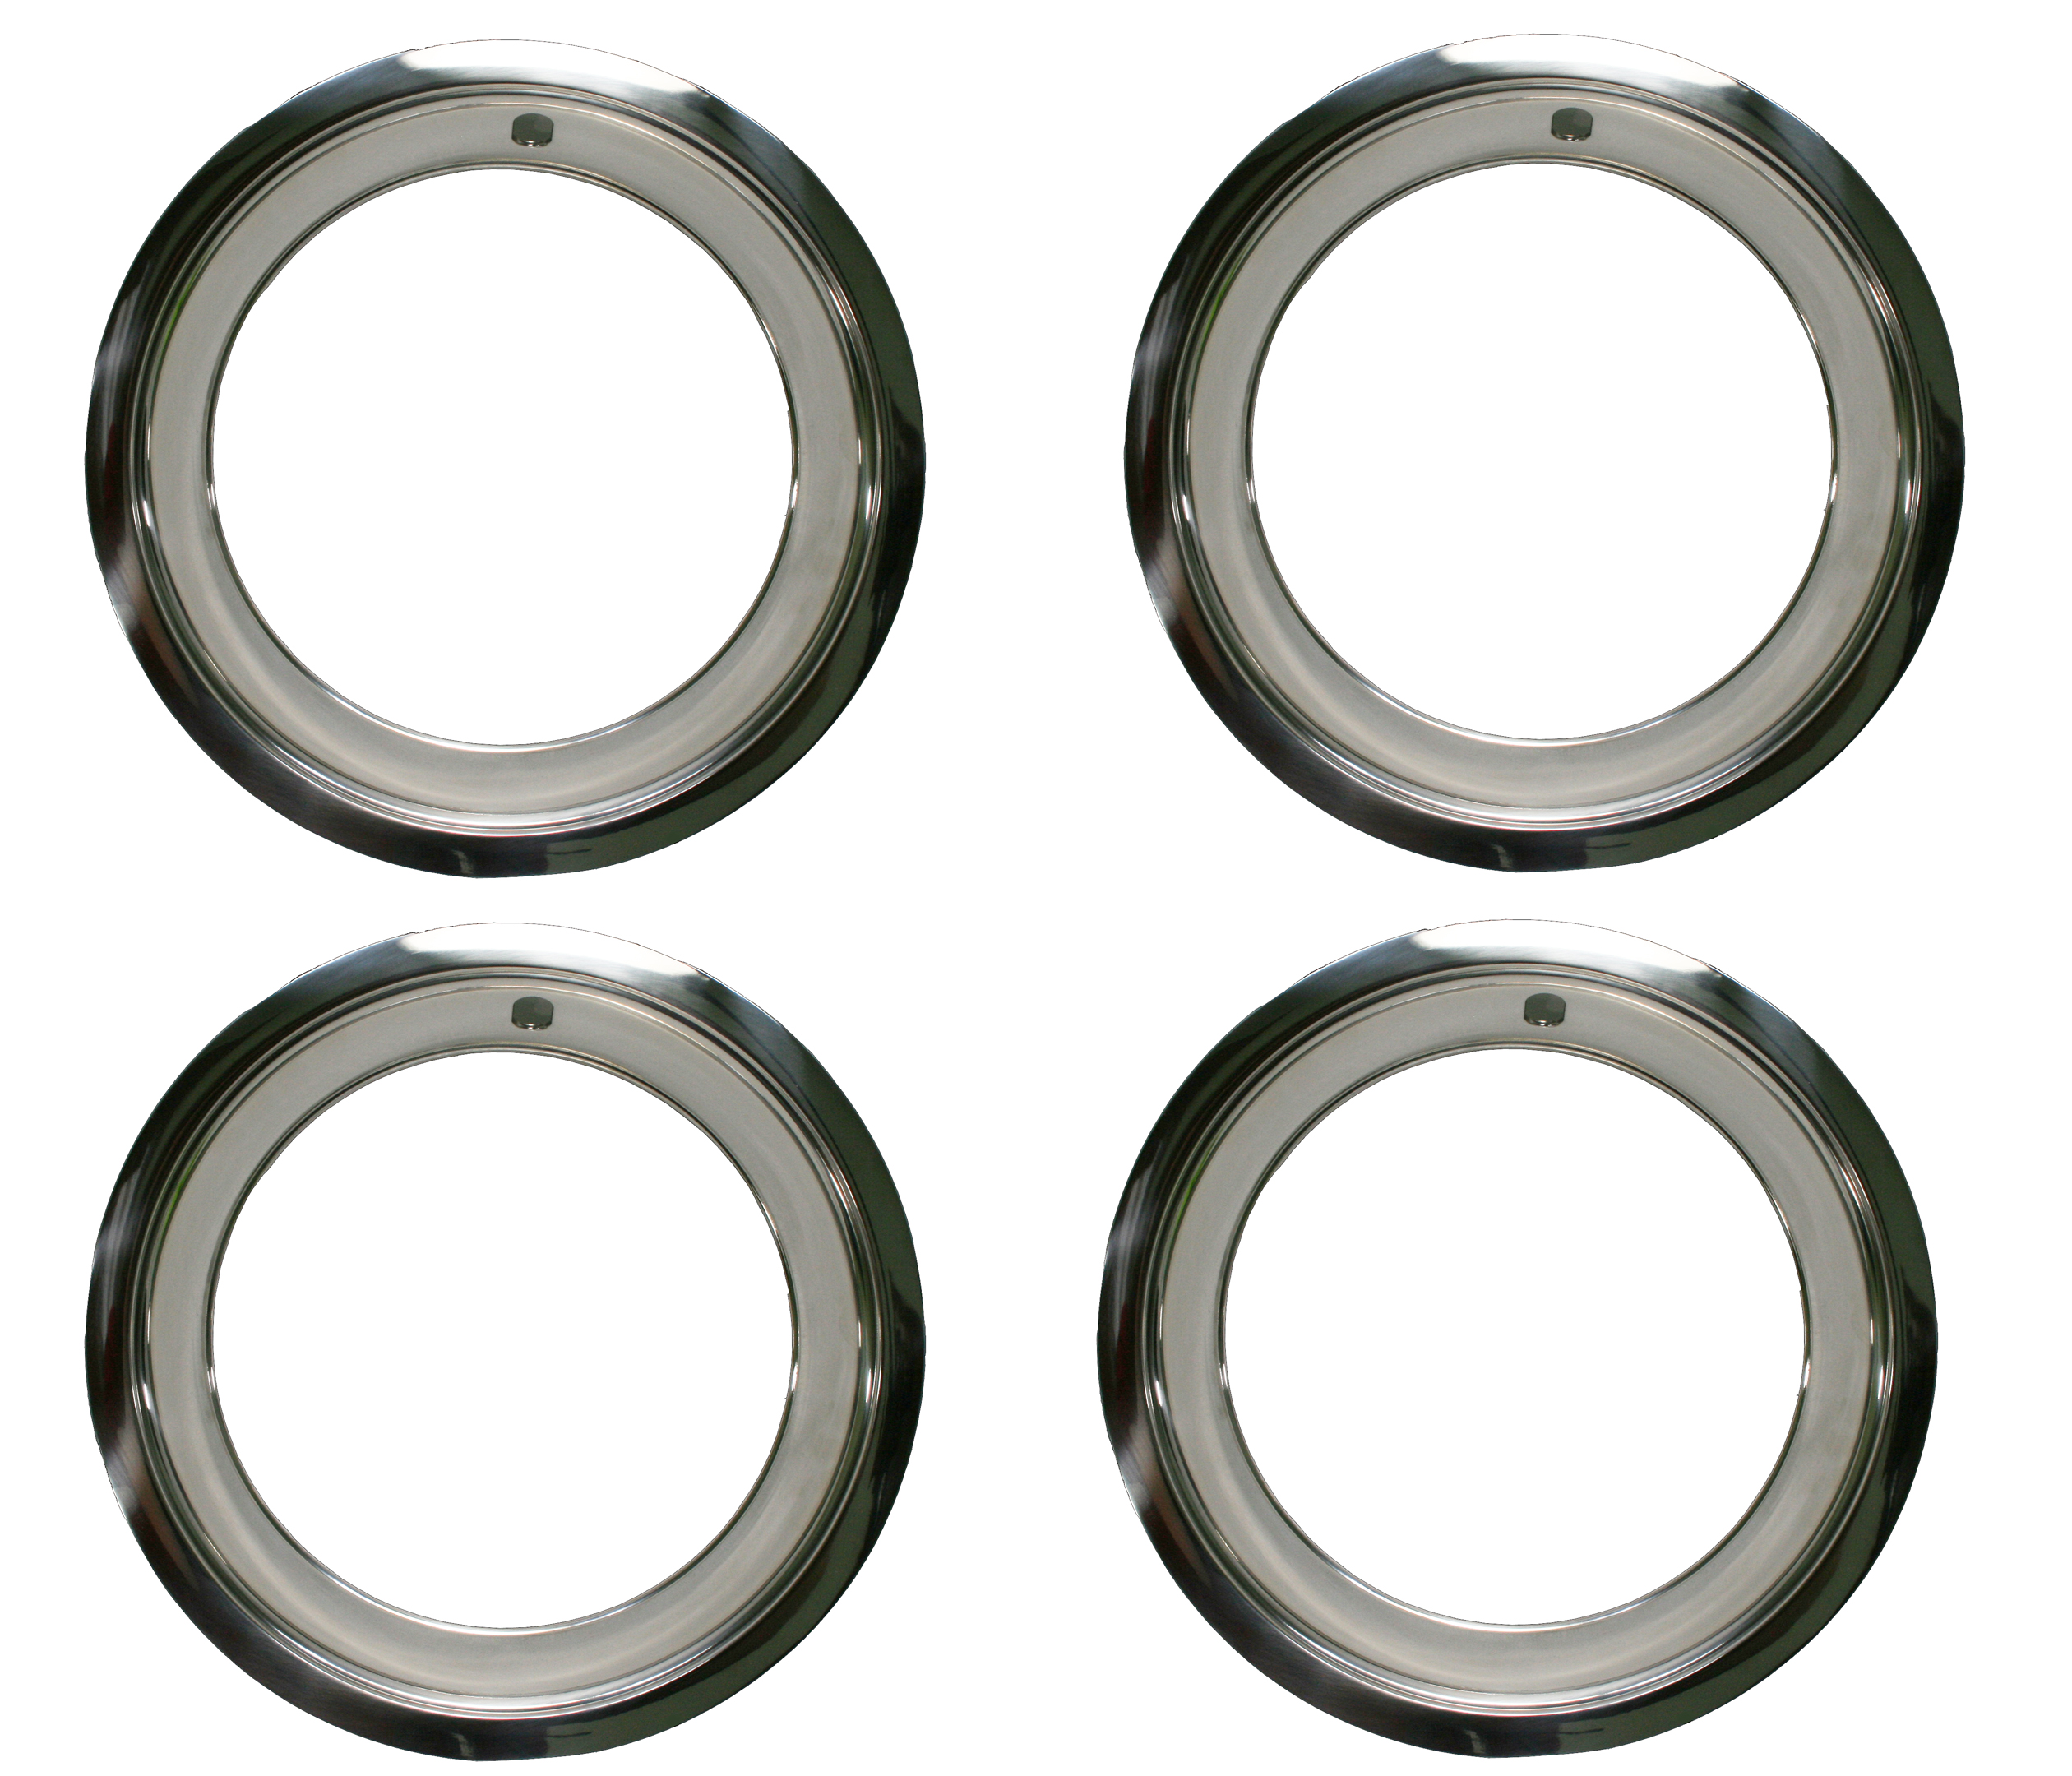 1969-1982 Corvette Rally Trim Rings 4 Piece Set with Correct Clips